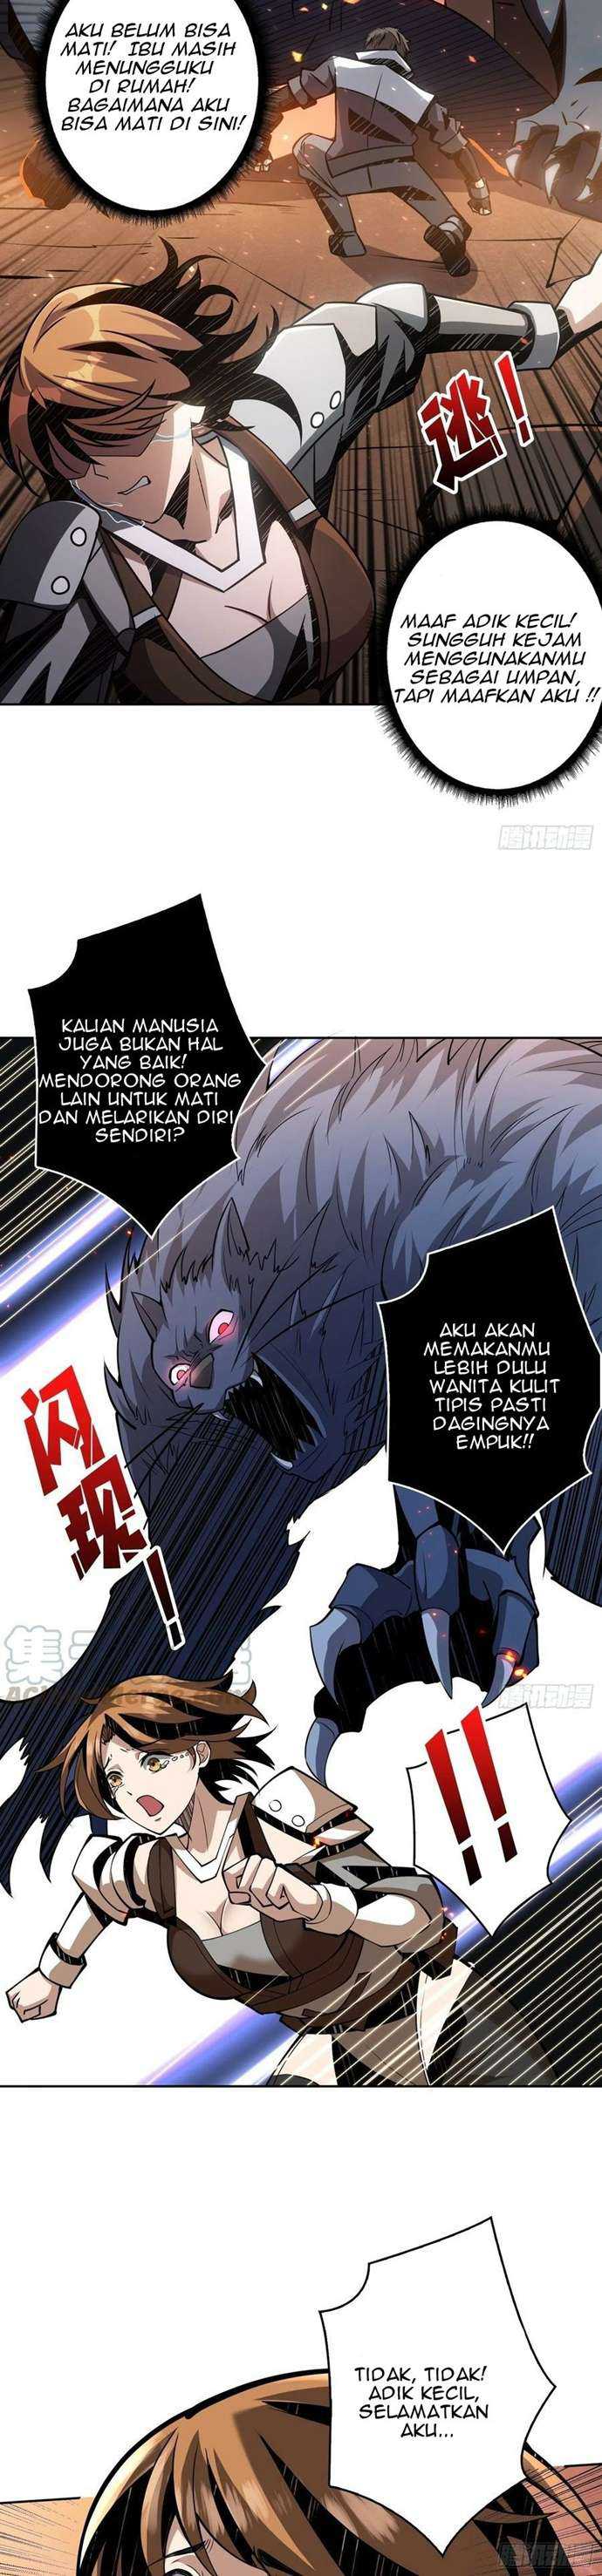 King Account At The Start Chapter 47 bahasa indonesi